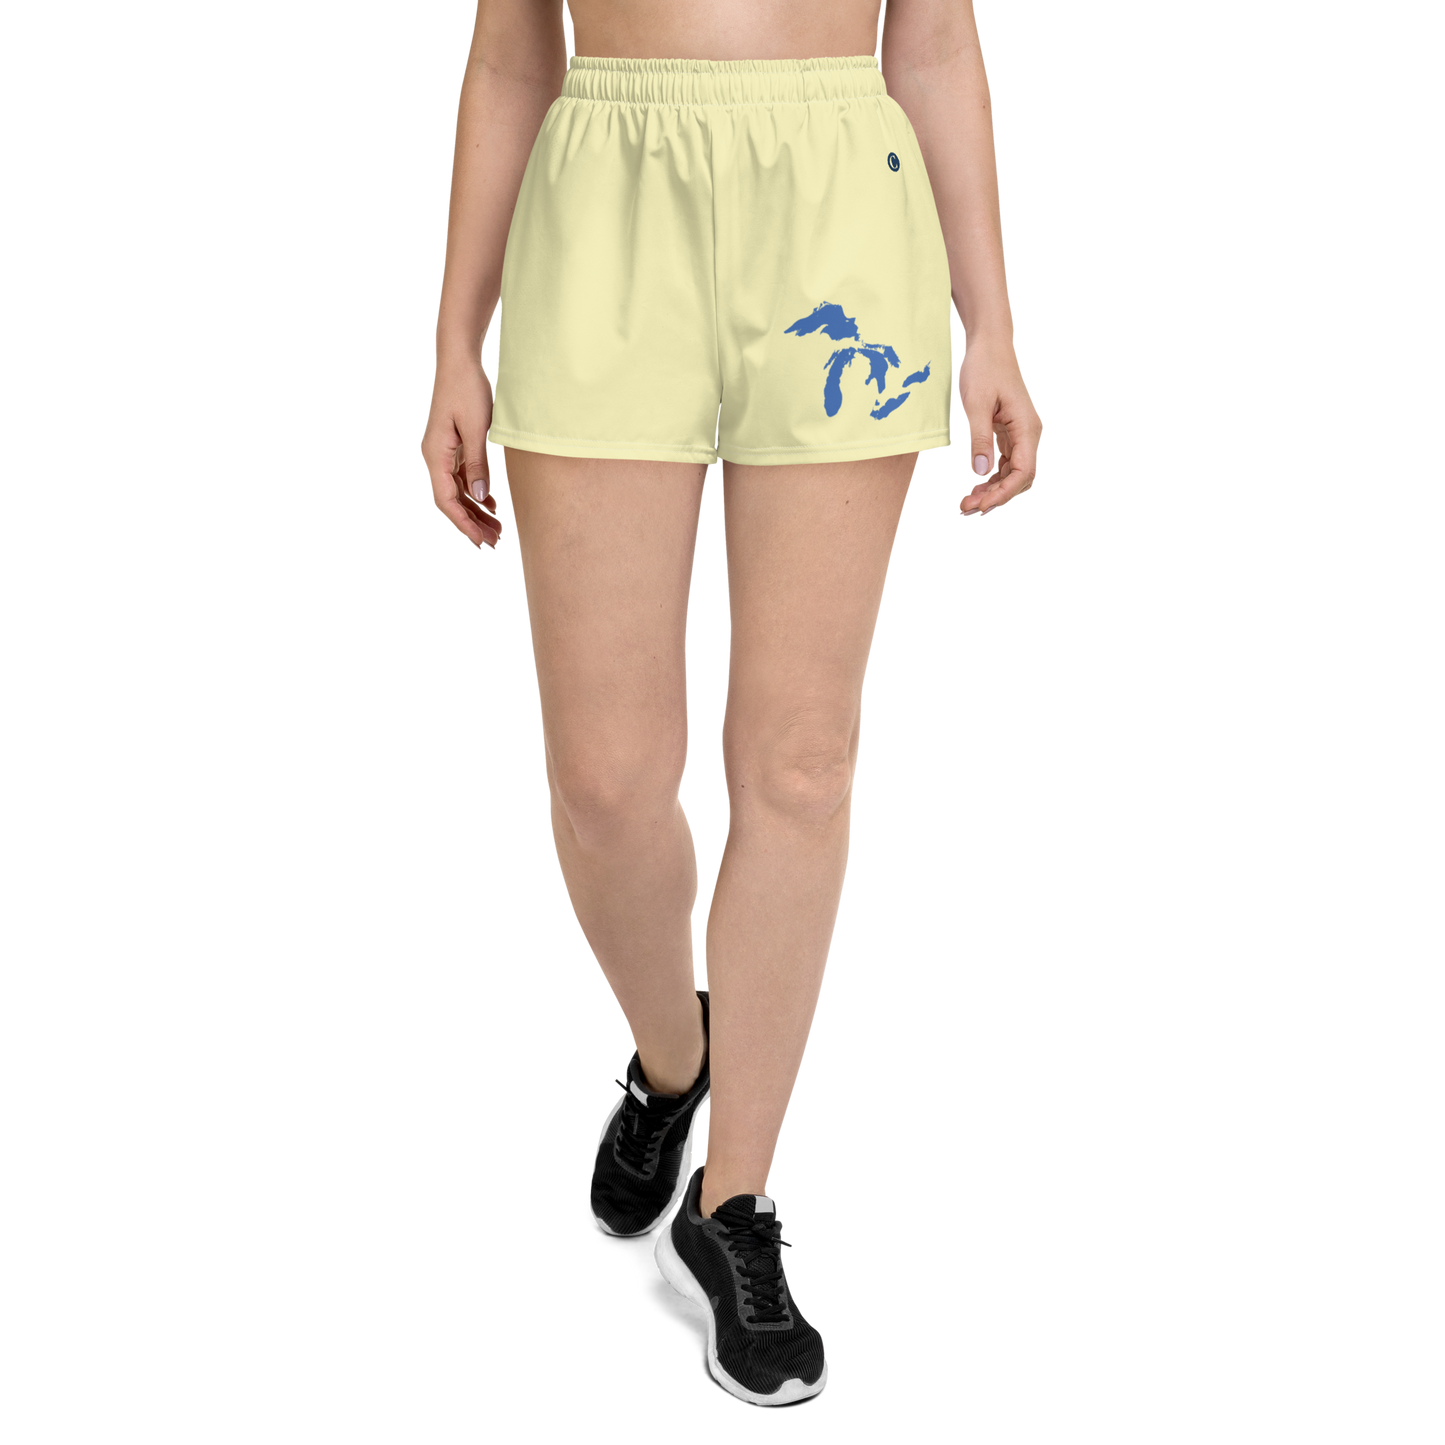 Great Lakes Athletic Shorts | Women's - Canary Yellow